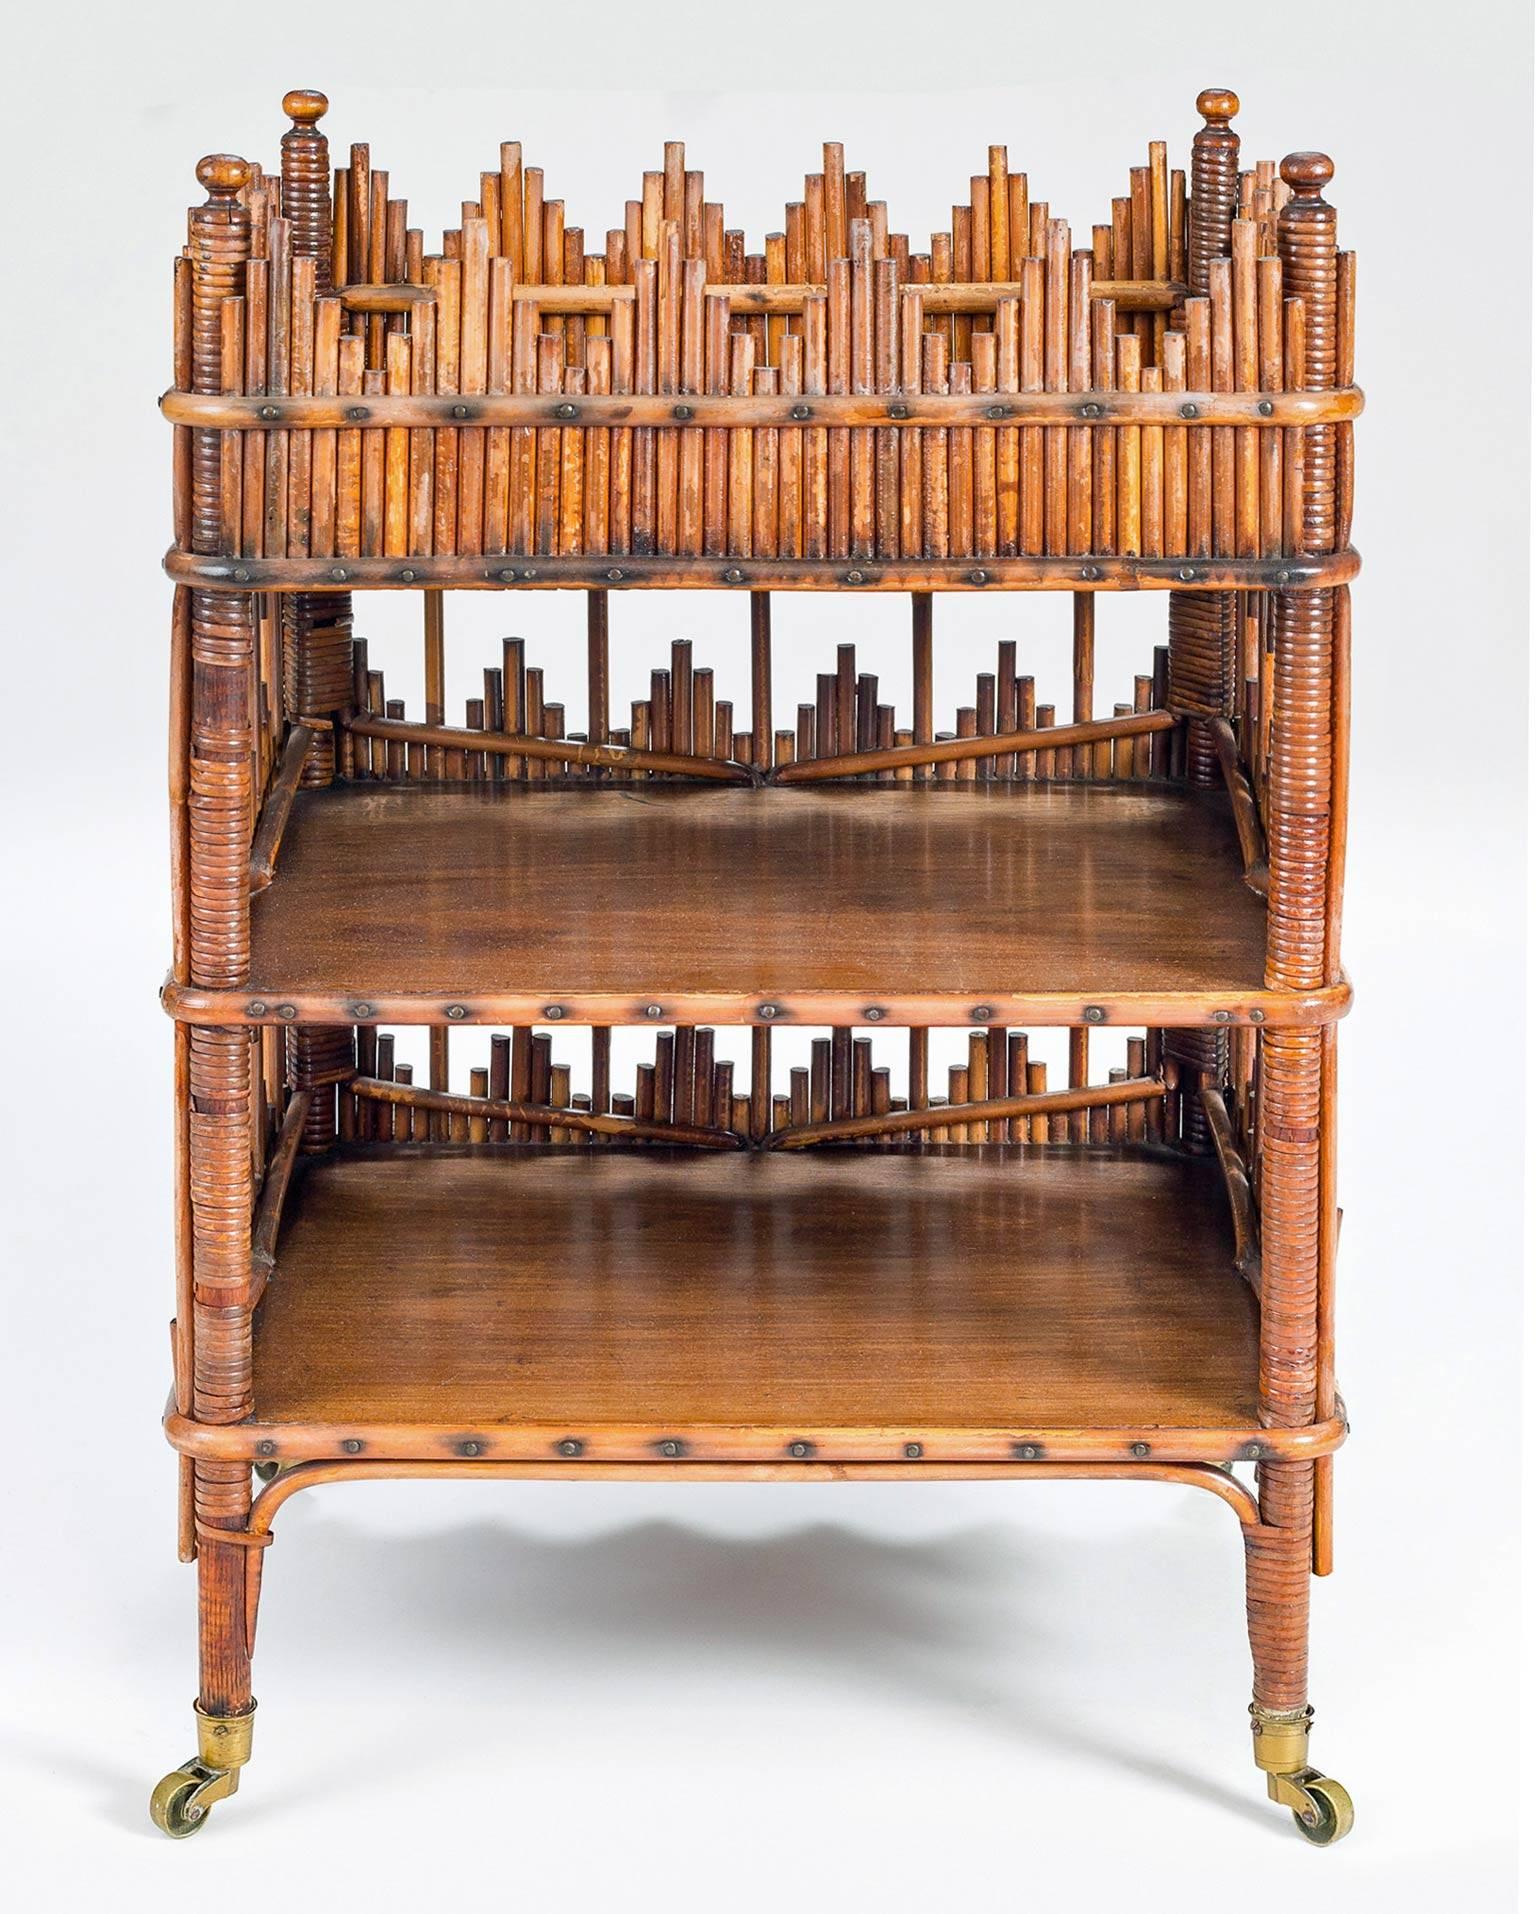 Unusual and charming bamboo three-tiered side or end table, the galleries made of bamboo pieces in diamond patterns, raised on casters.